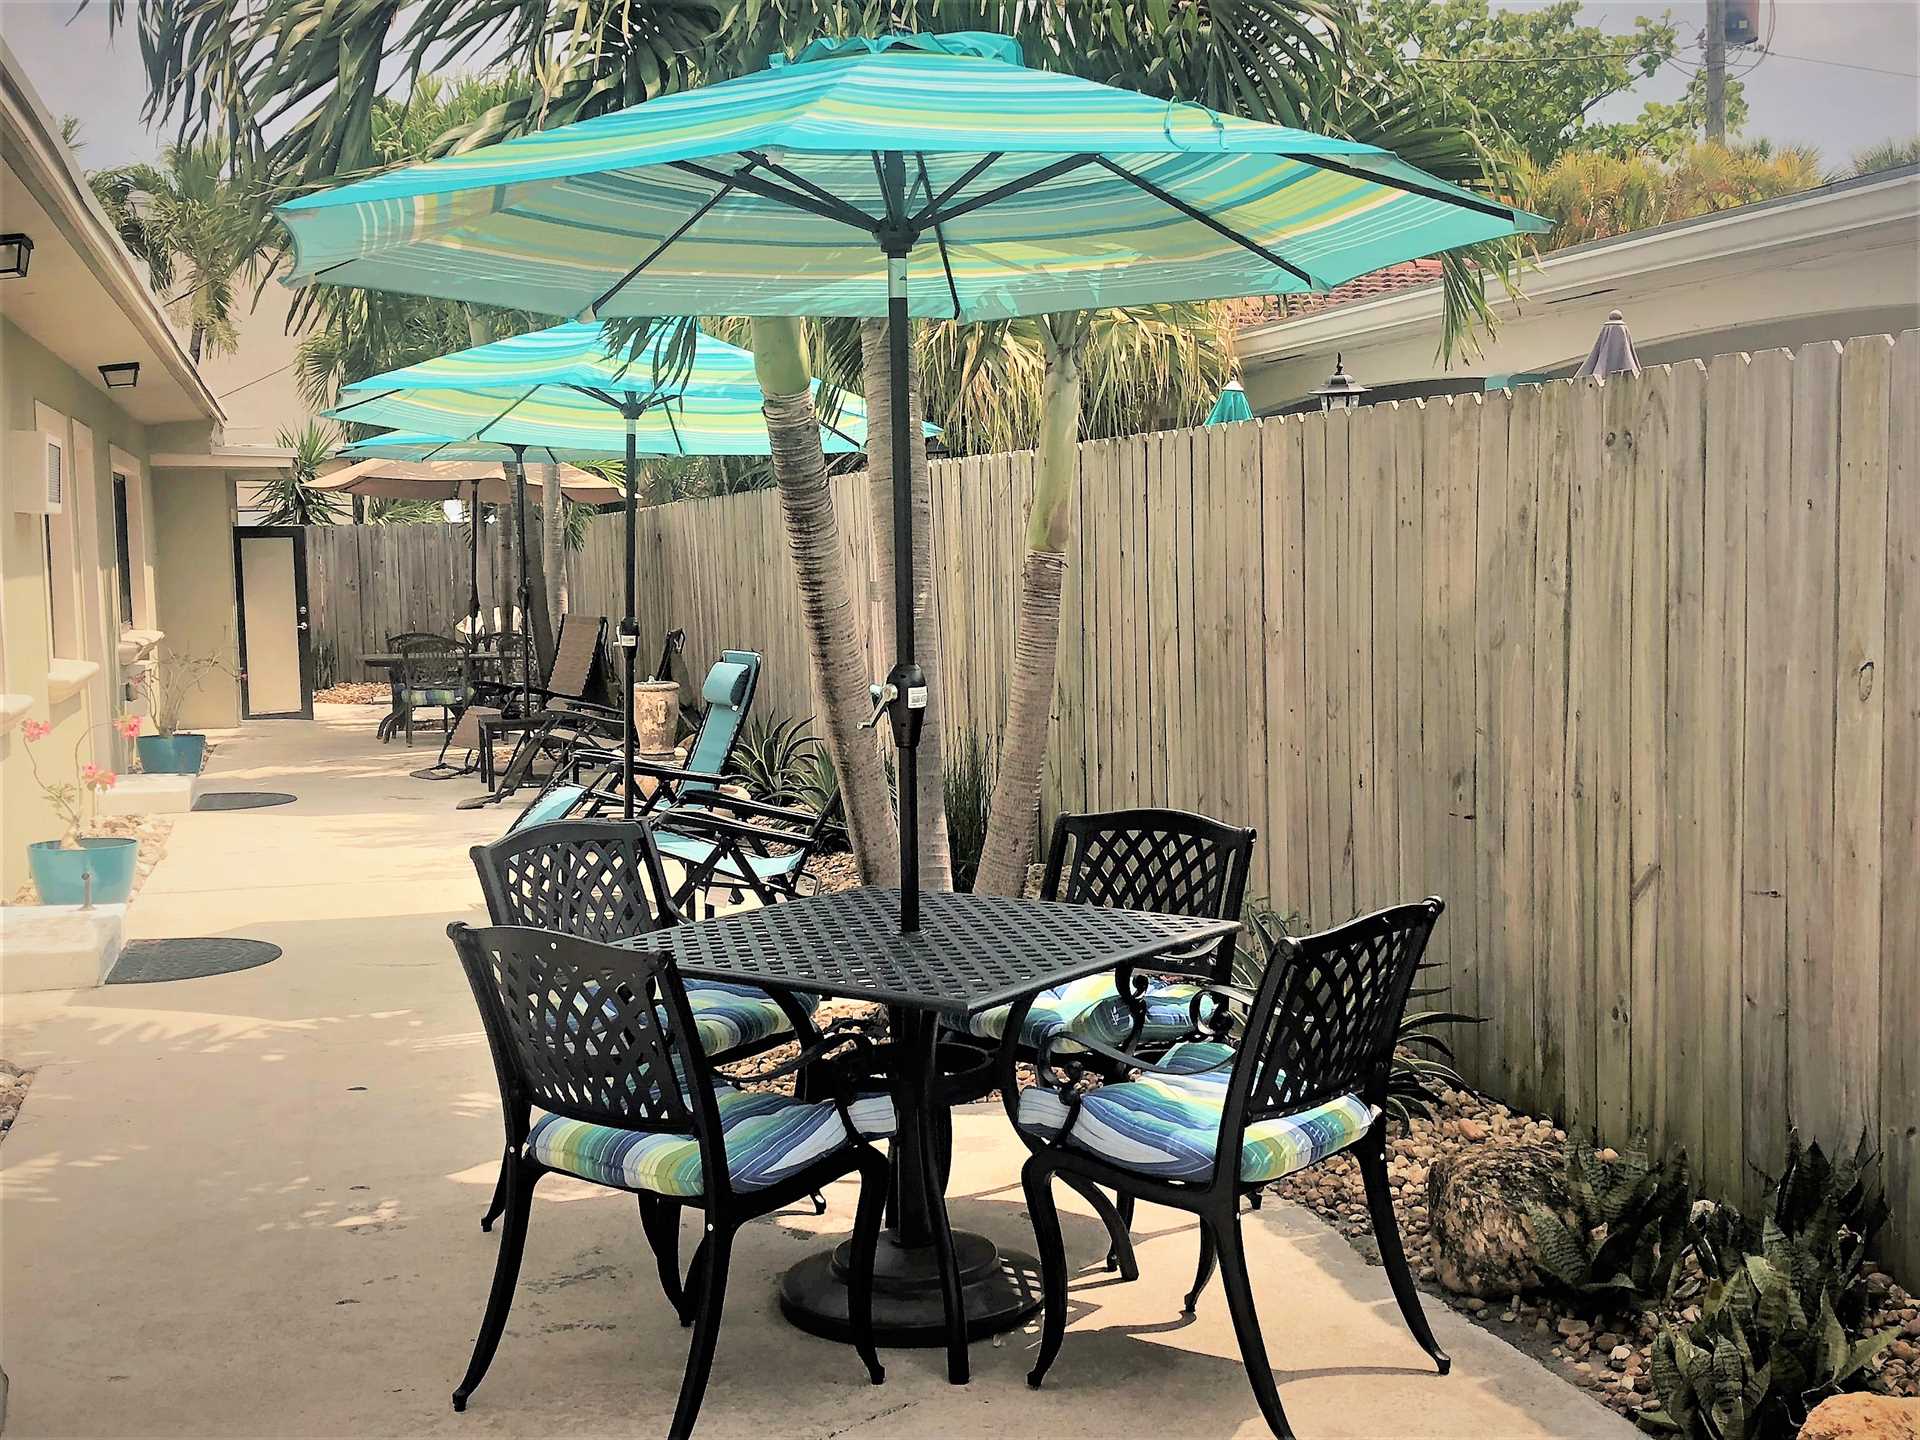 Dine at one of the patio tables and experience the South Flo